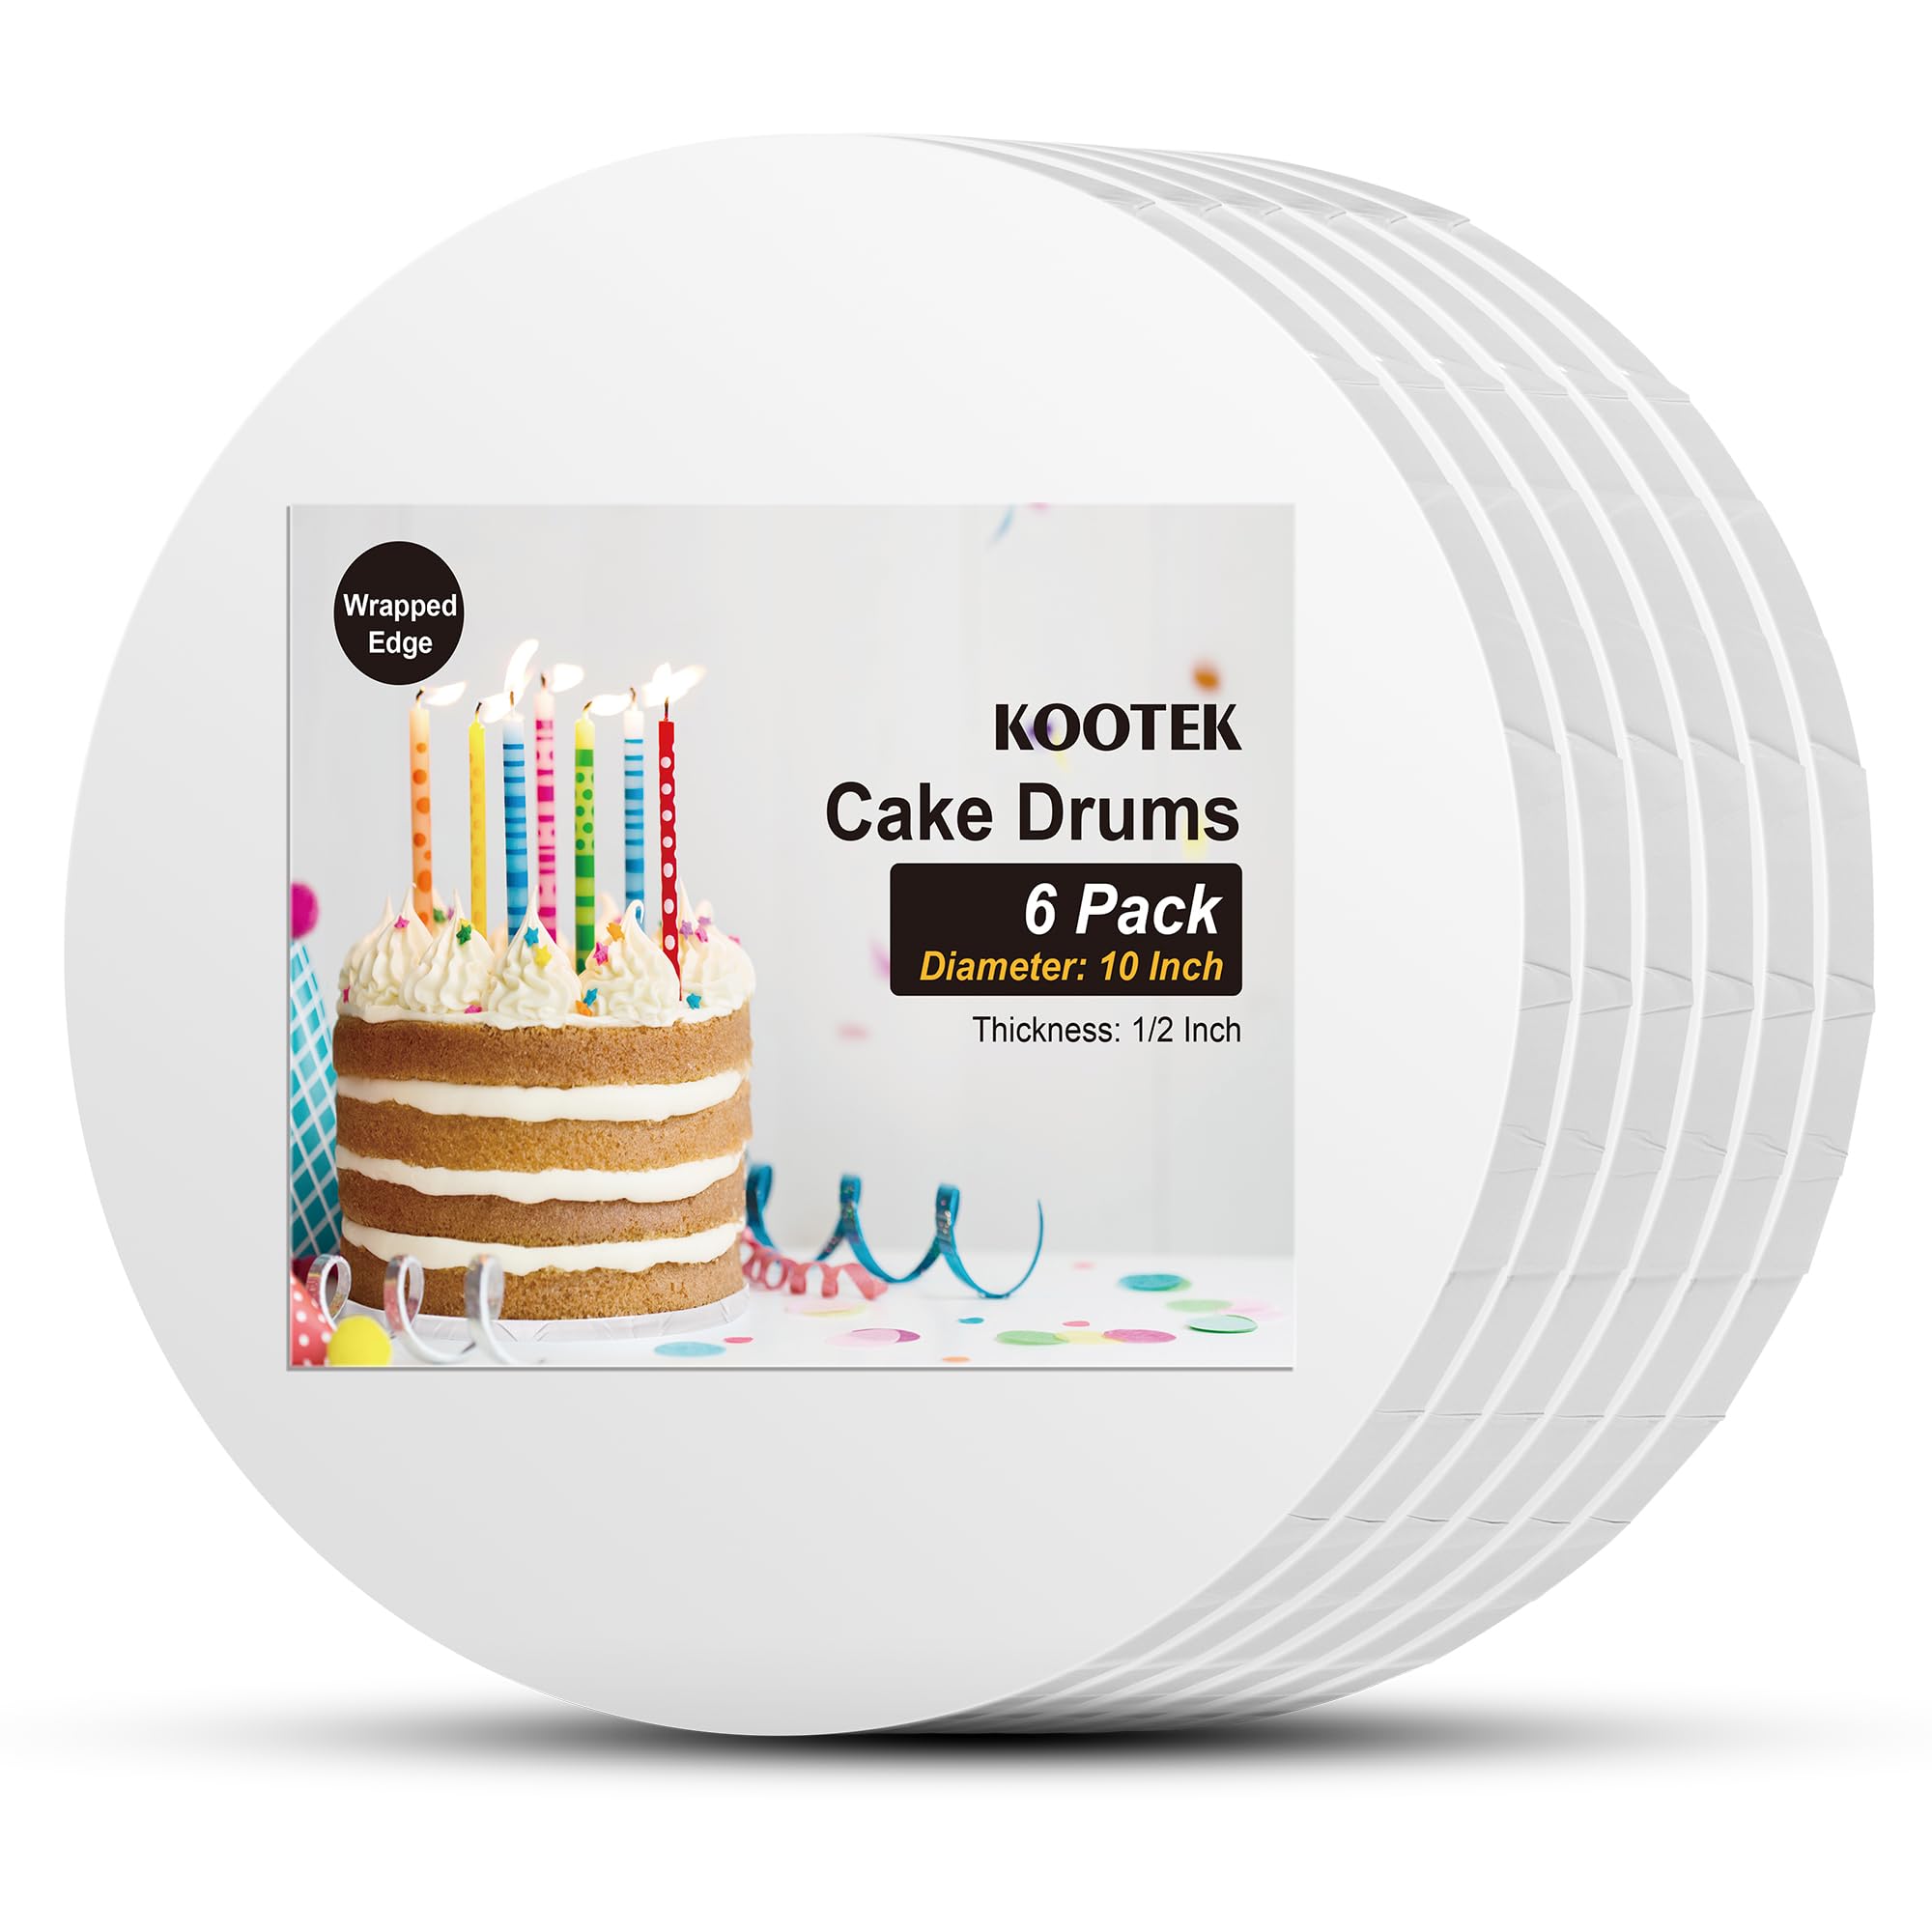 Kootek Cake Boards Drum 10 Inch Round, 1/2" Thick Cake Drums with Fully Wrapped Edges, Cake Decorating Supplies White 6-Pack Sturdy Cake Corrugated Cardboard for Multi-Layer Cakes